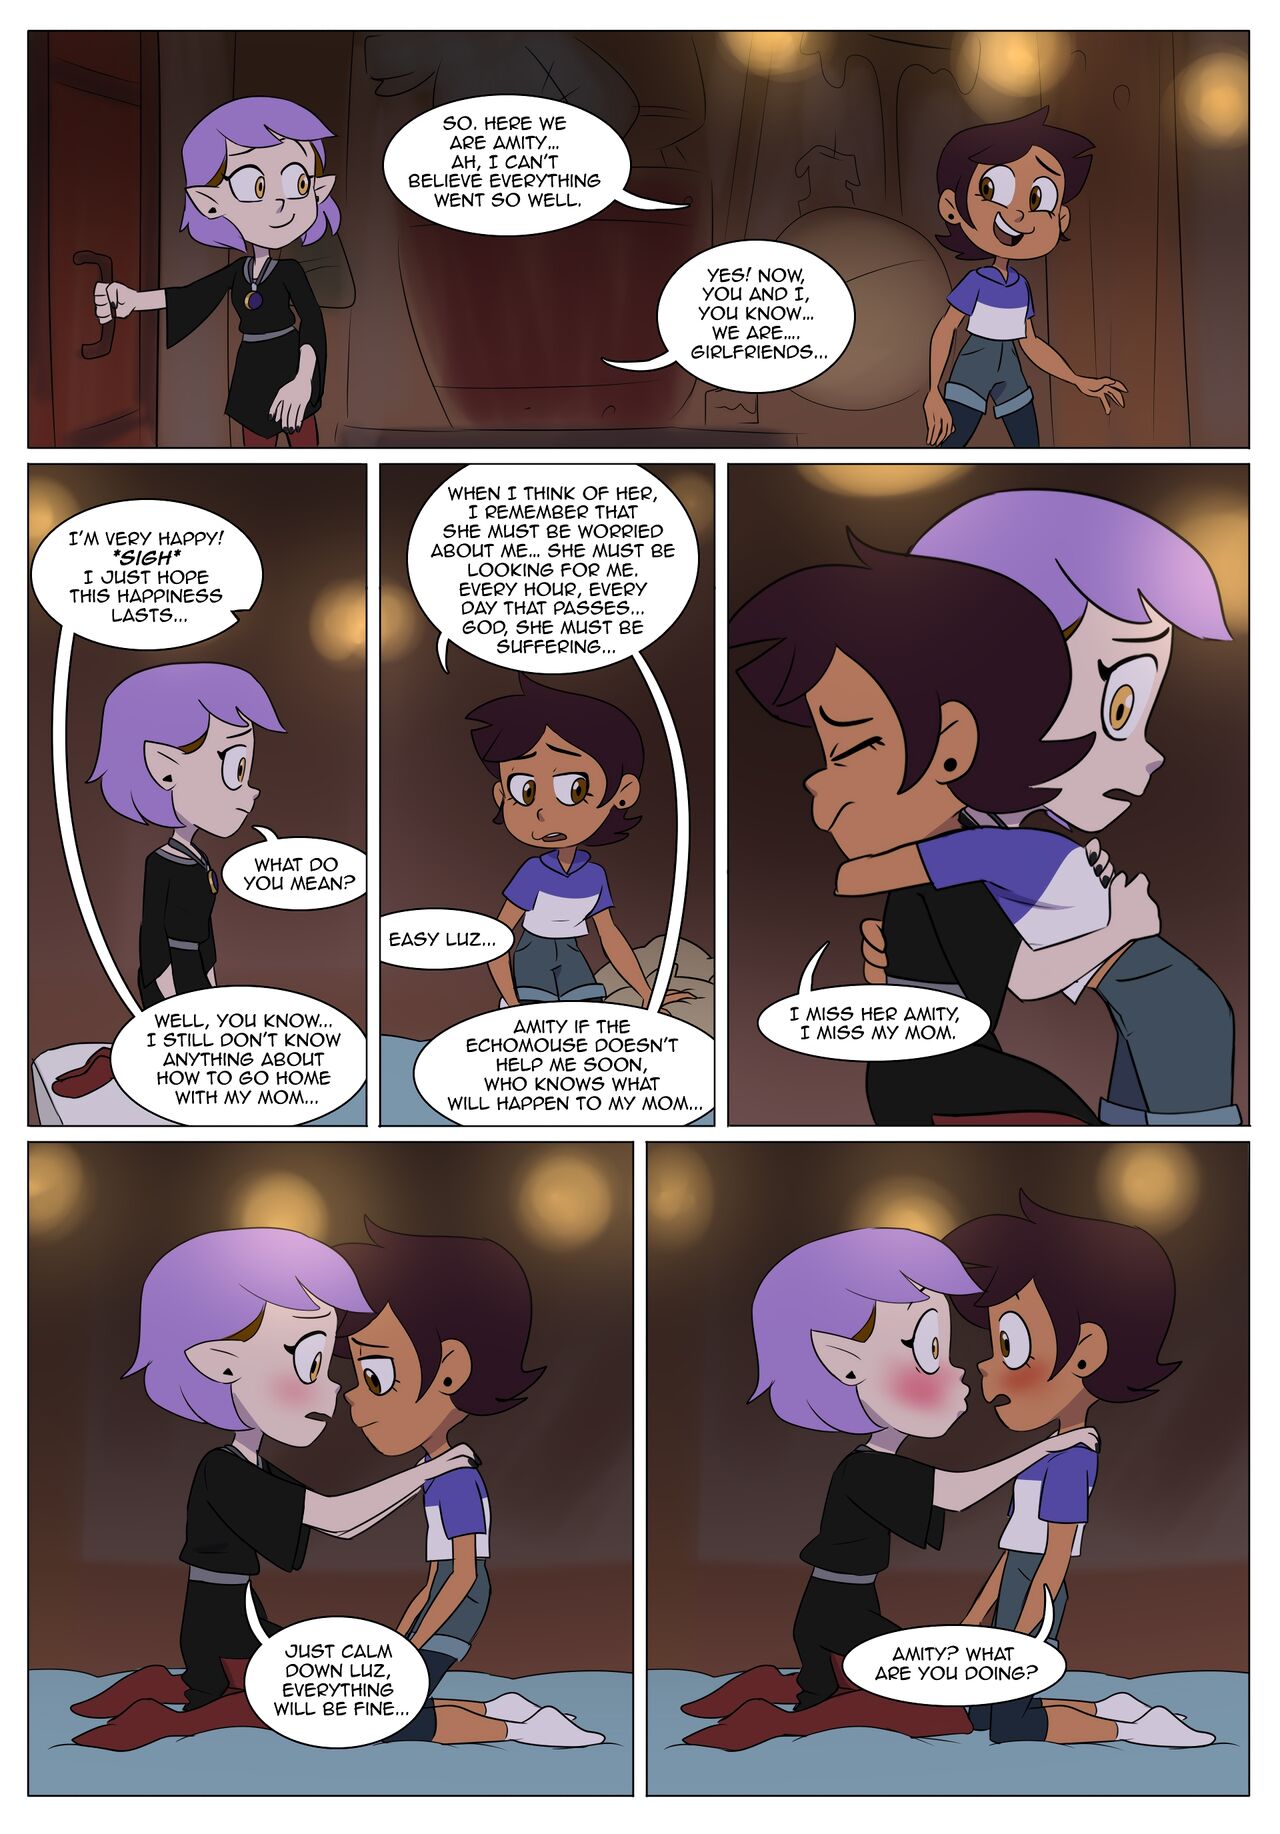 First Night Together - Page 2 - IMHentai